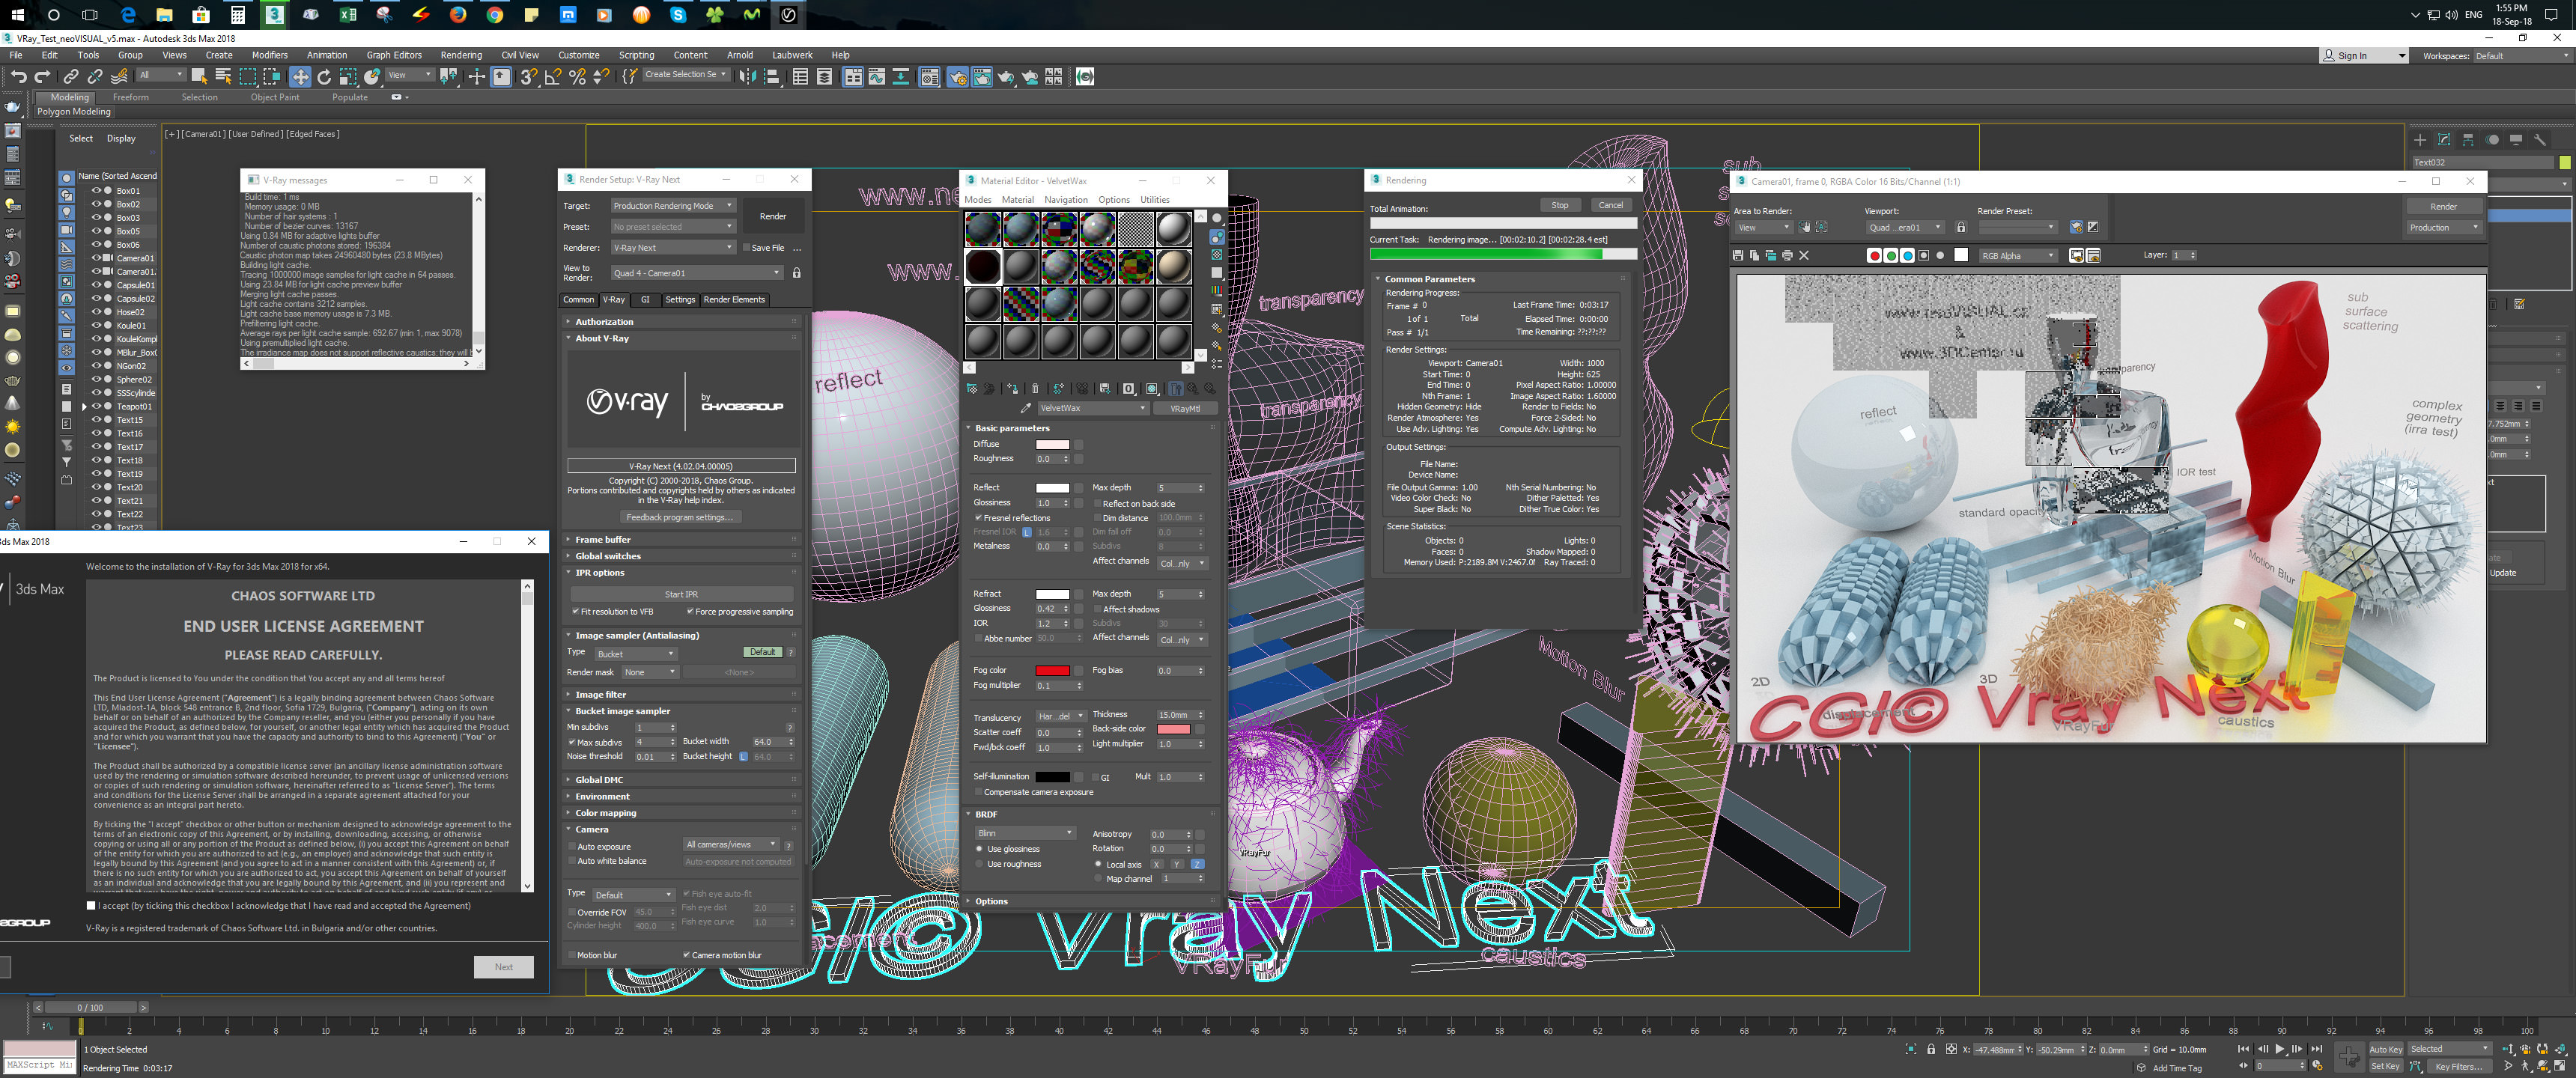 how to install vray 3.6 crack for 3ds max 2016